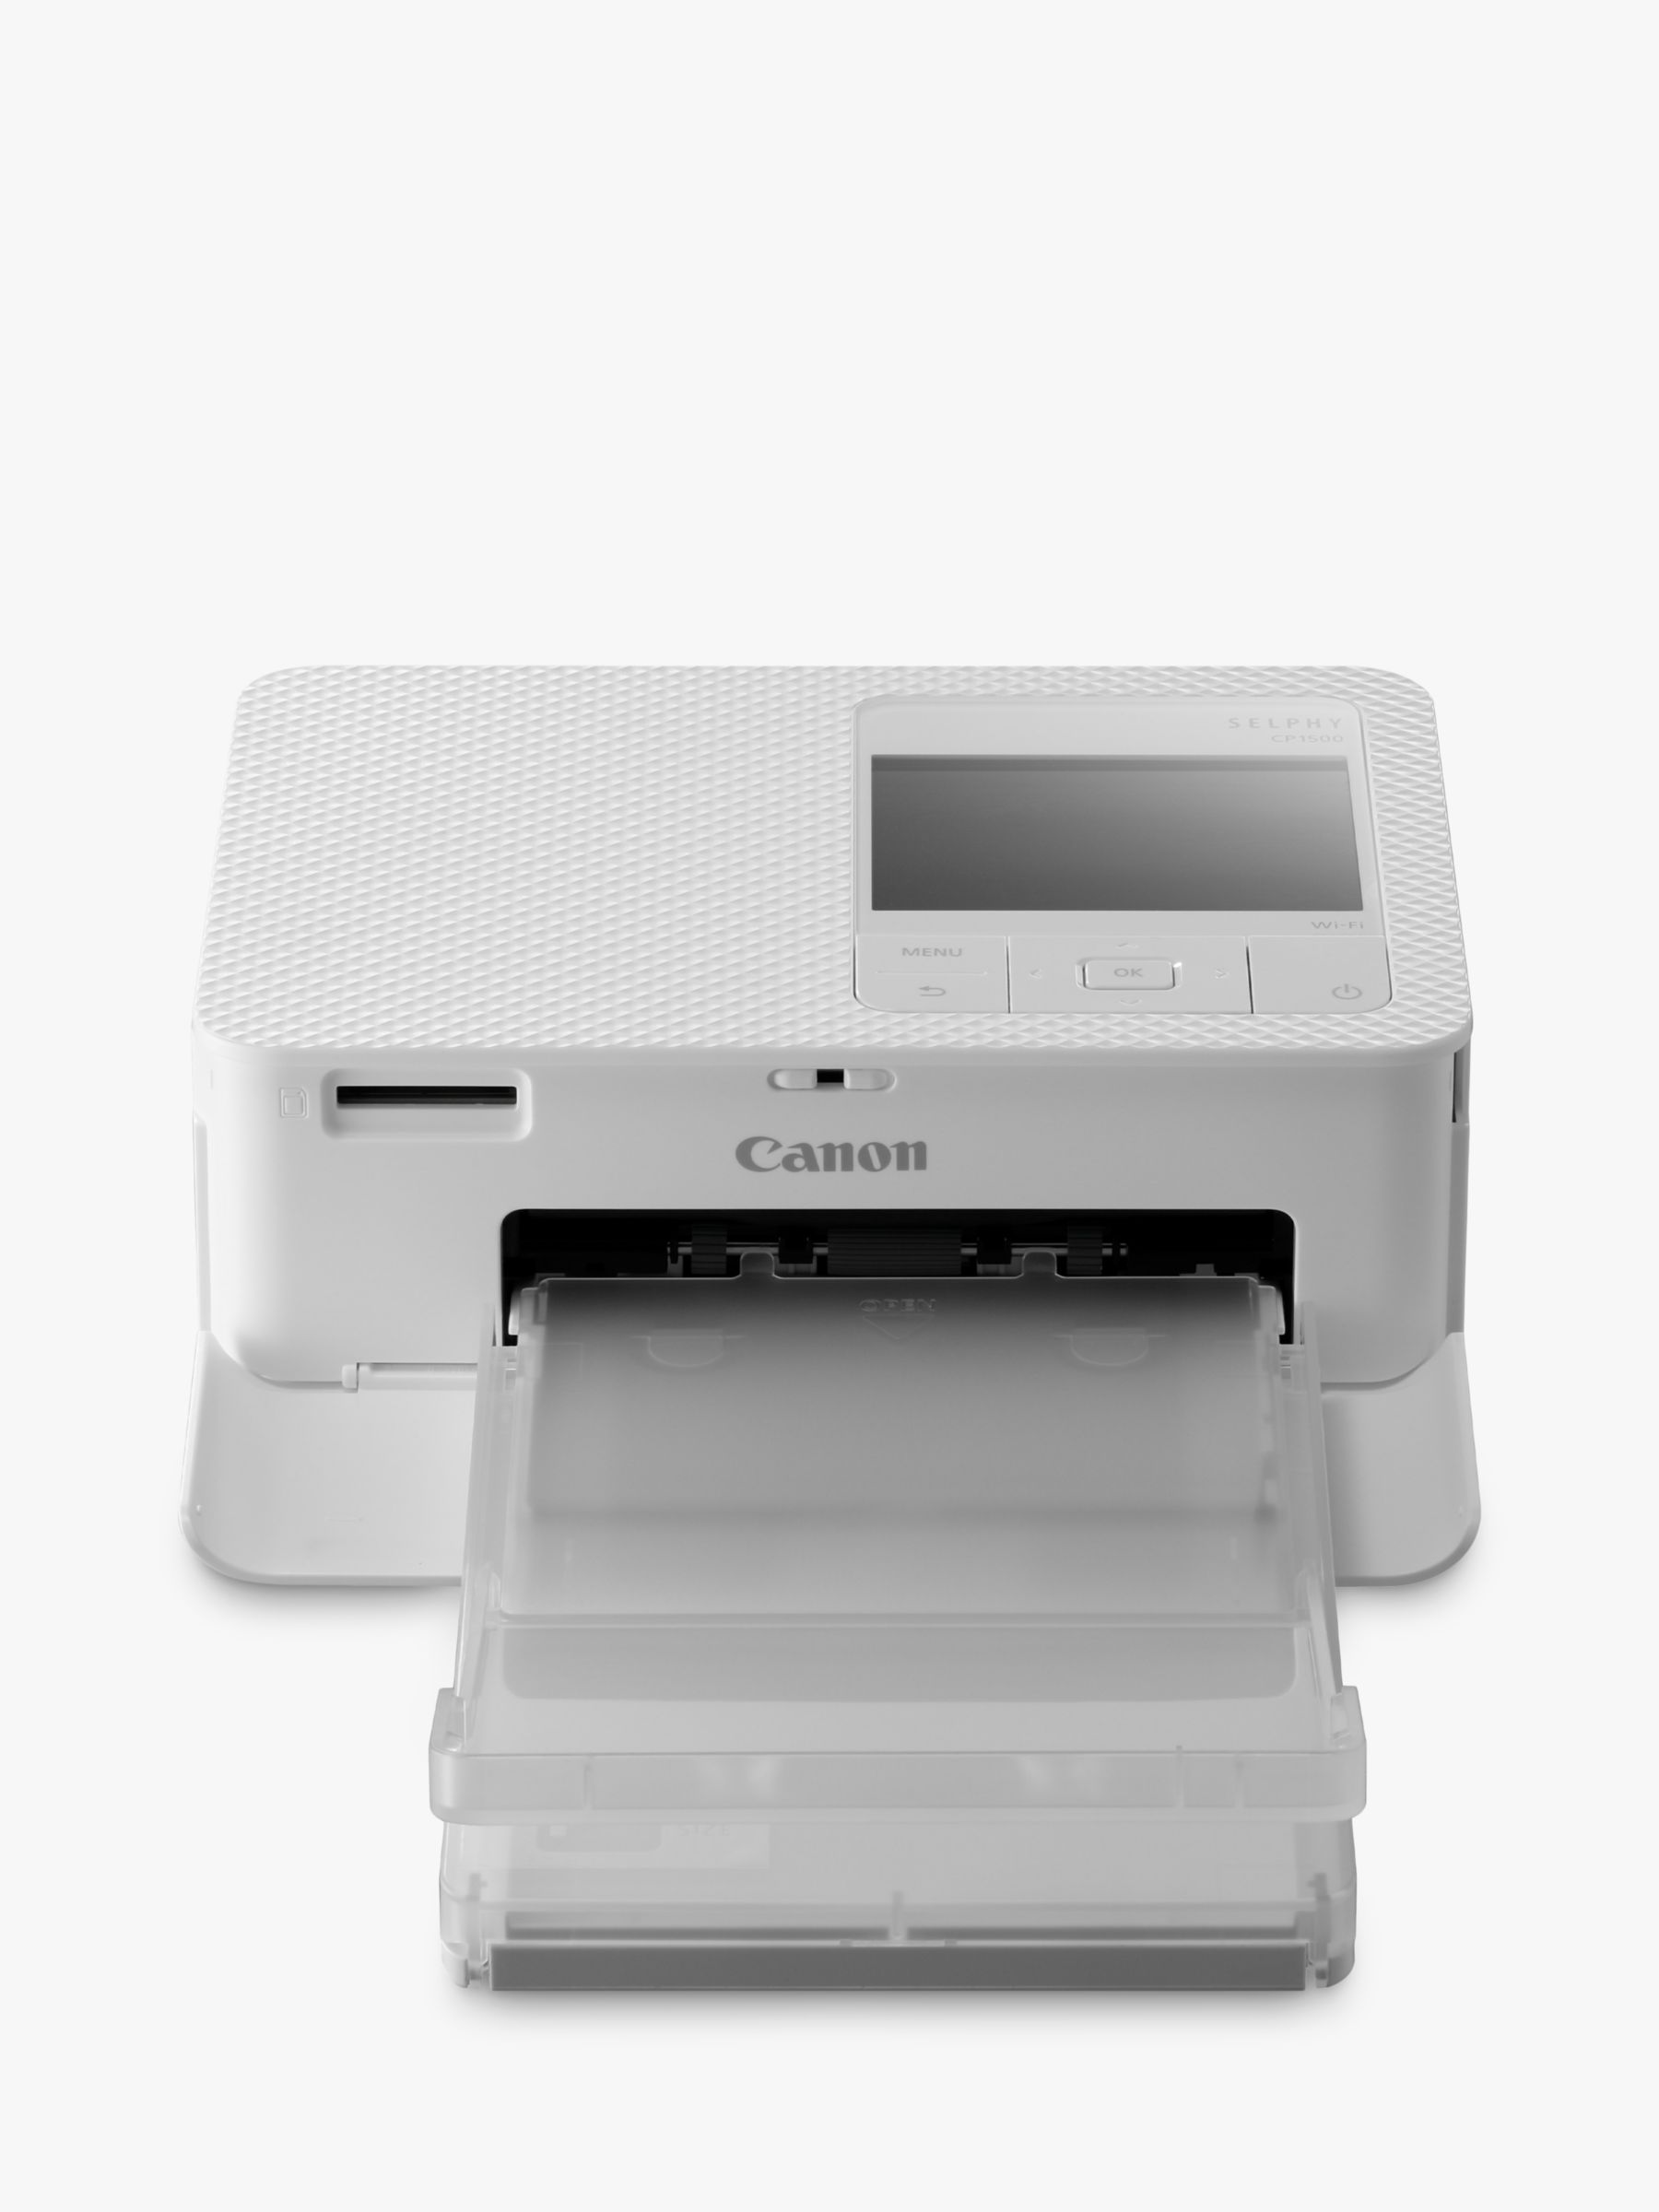 Canon SELPHY CP1500 Wireless Compact Photo Printer, White w/Ink